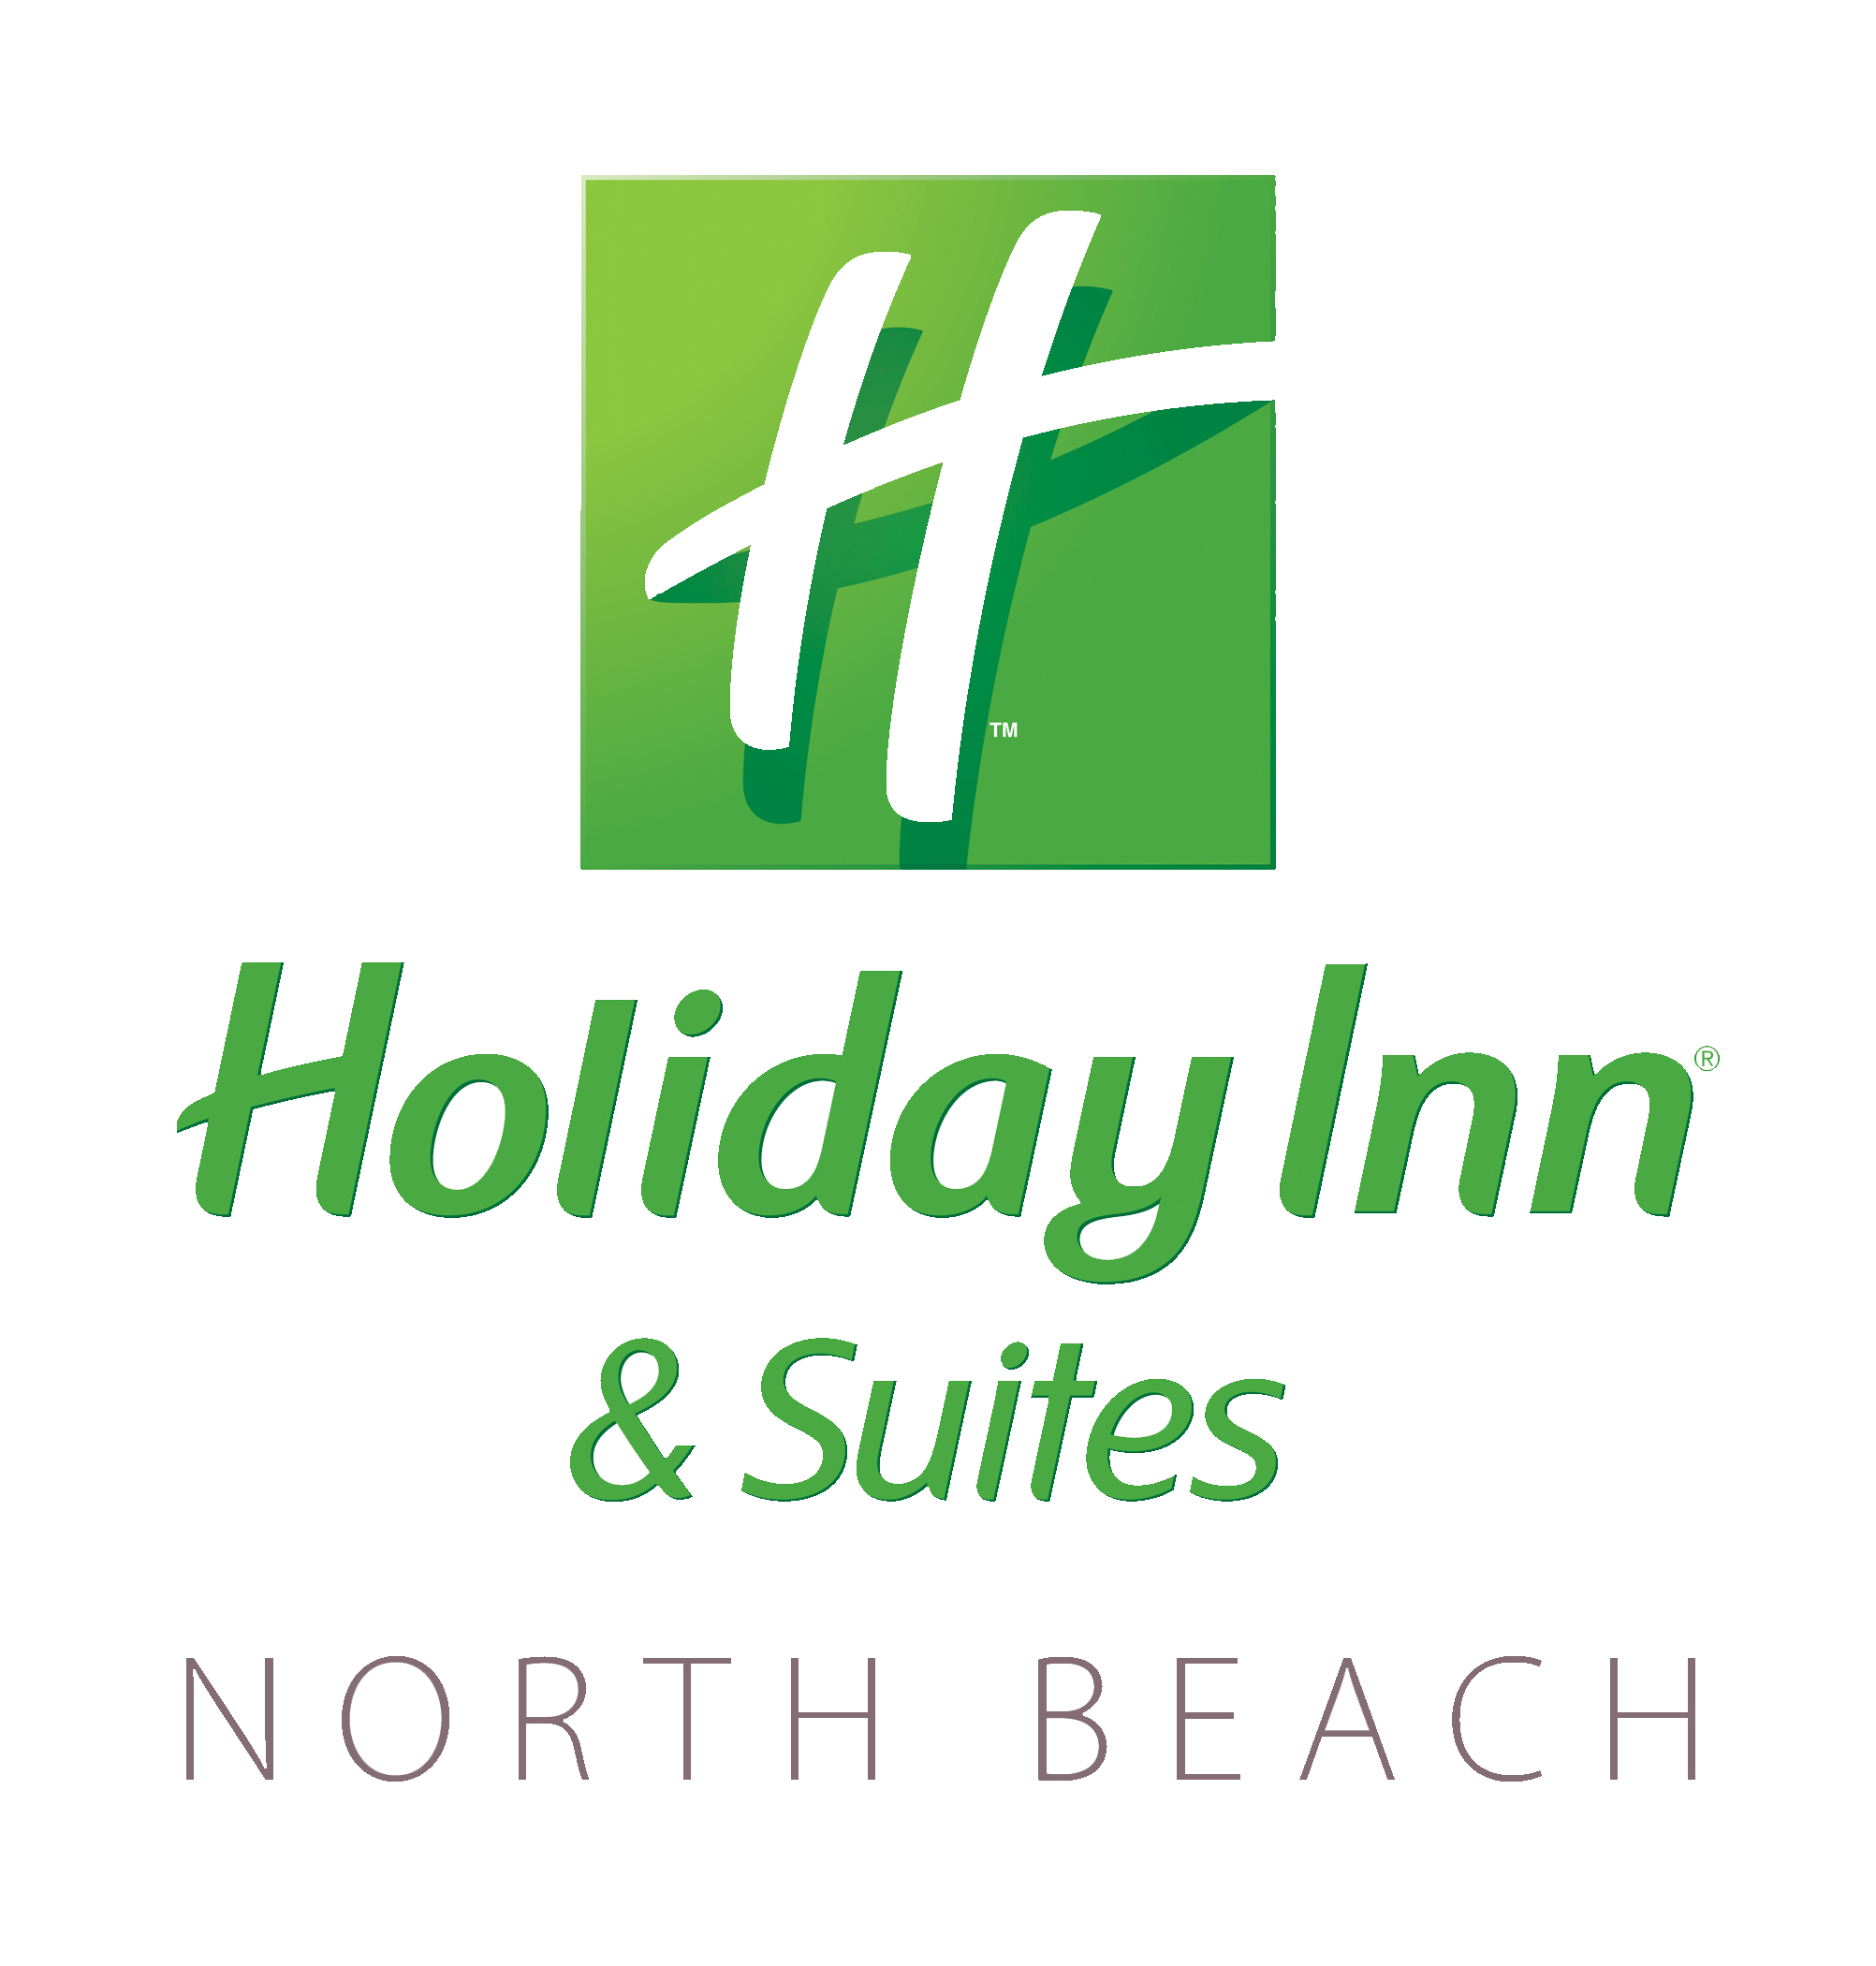 Holiday Inn and Suites North Beach logo